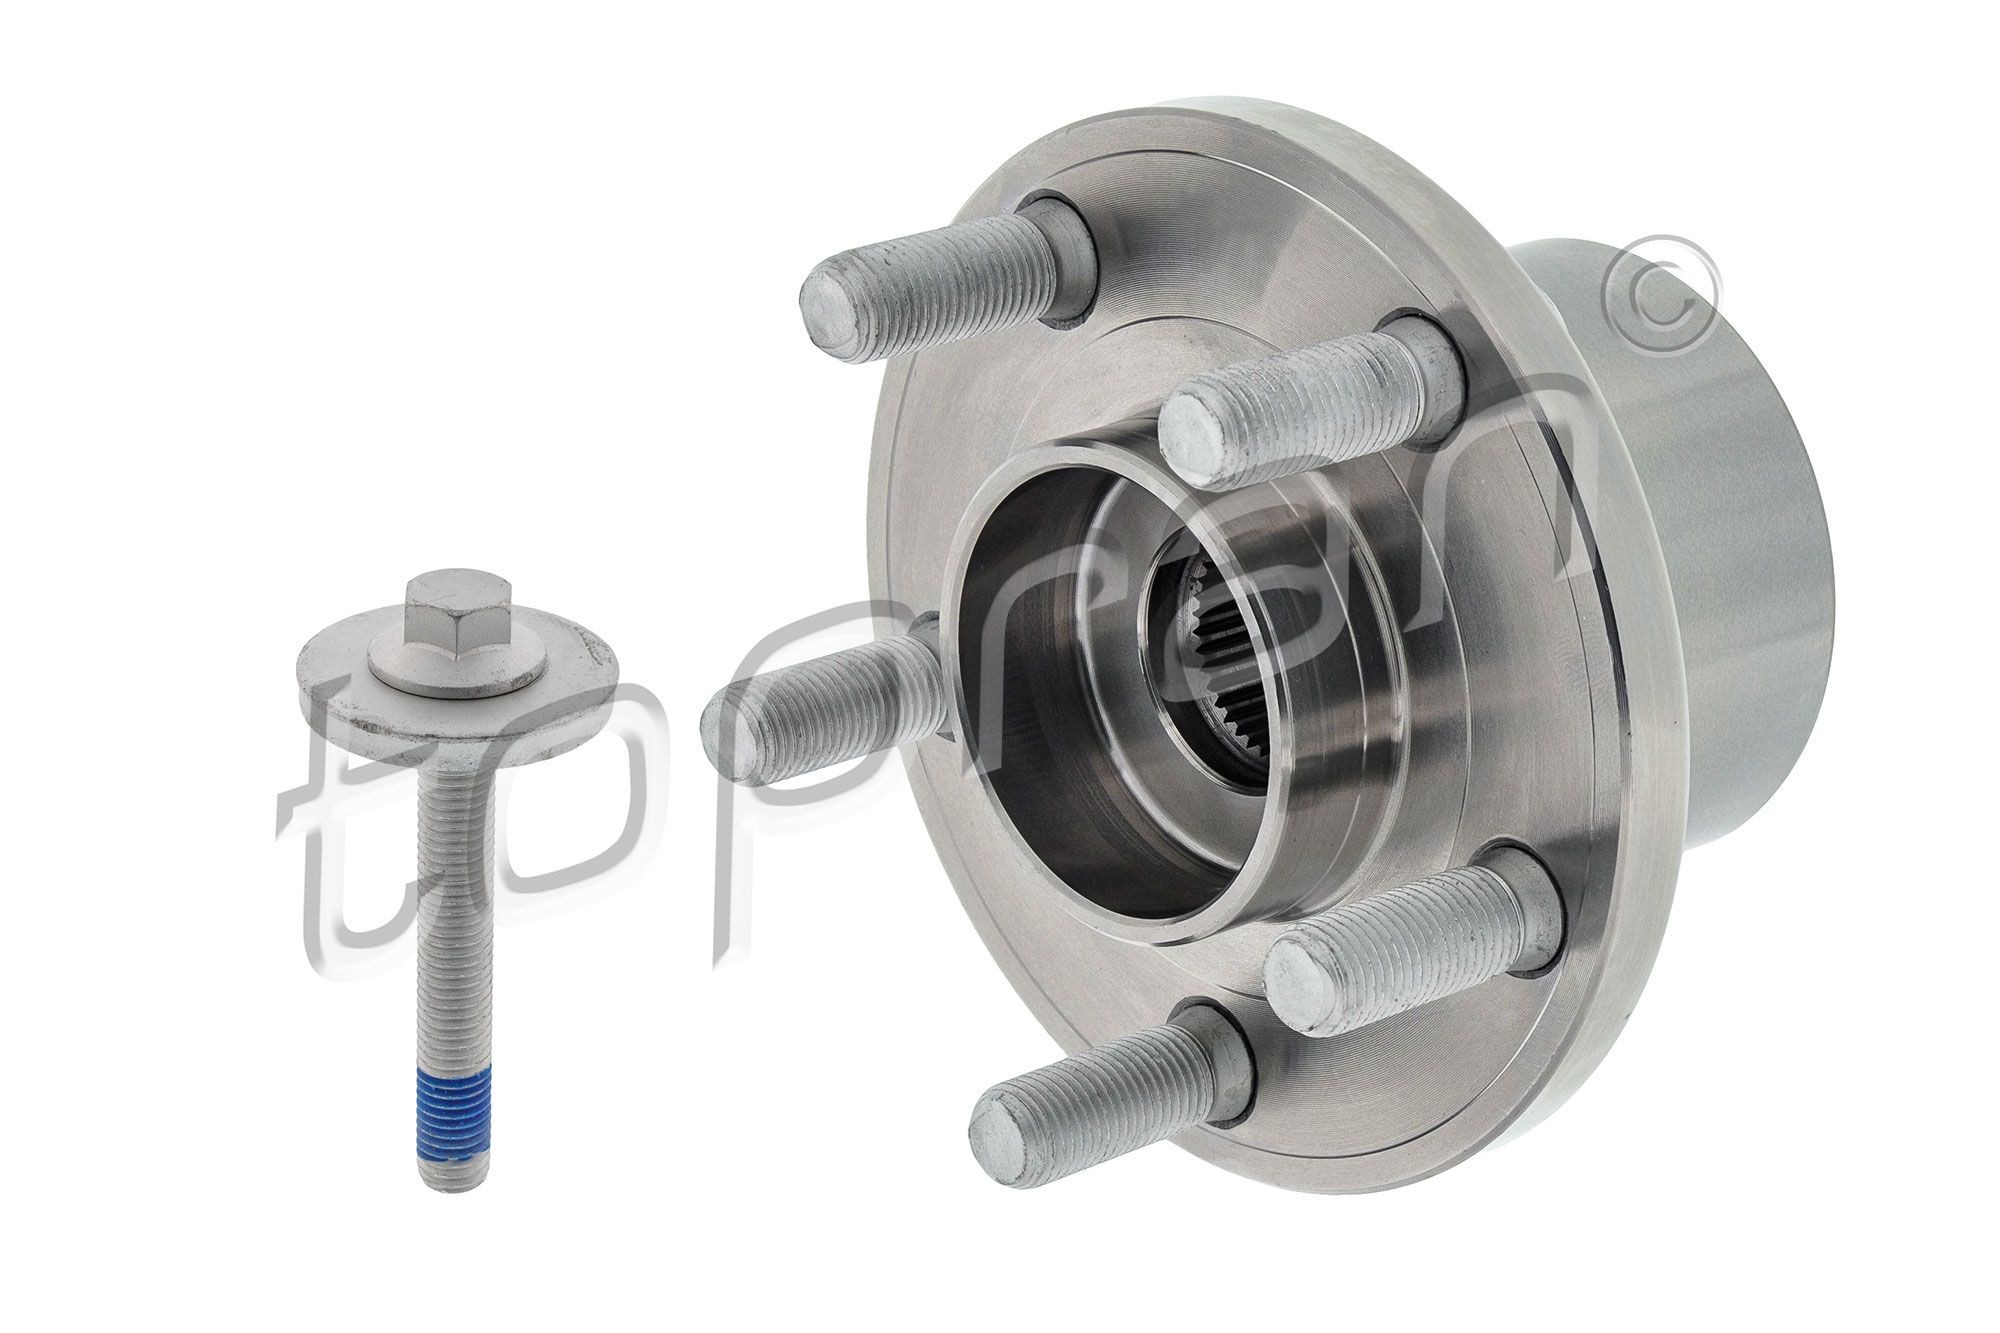 TOPRAN 304 567 Wheel Hub 5x108, Wheel Bearing integrated into wheel hub, with integrated magnetic sensor ring, with studs, Front axle both sides